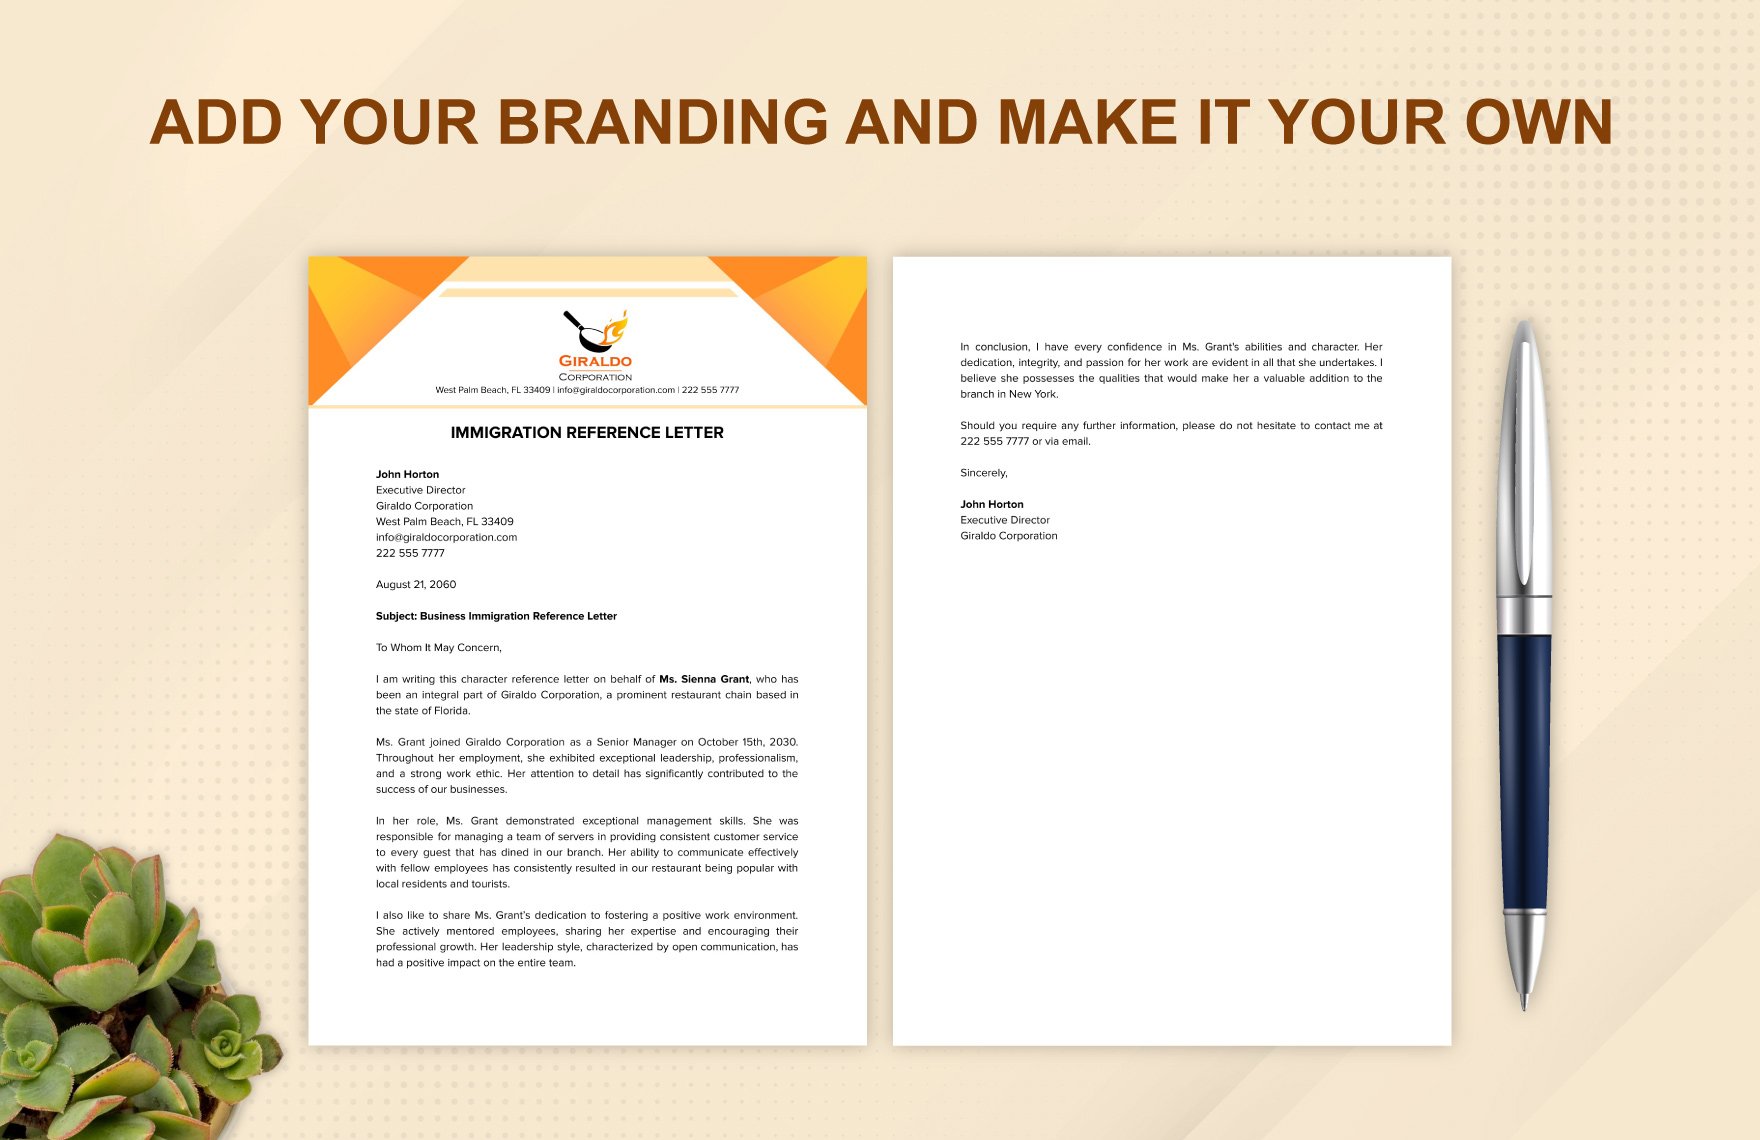 Sample Business Immigration Reference Letter Template